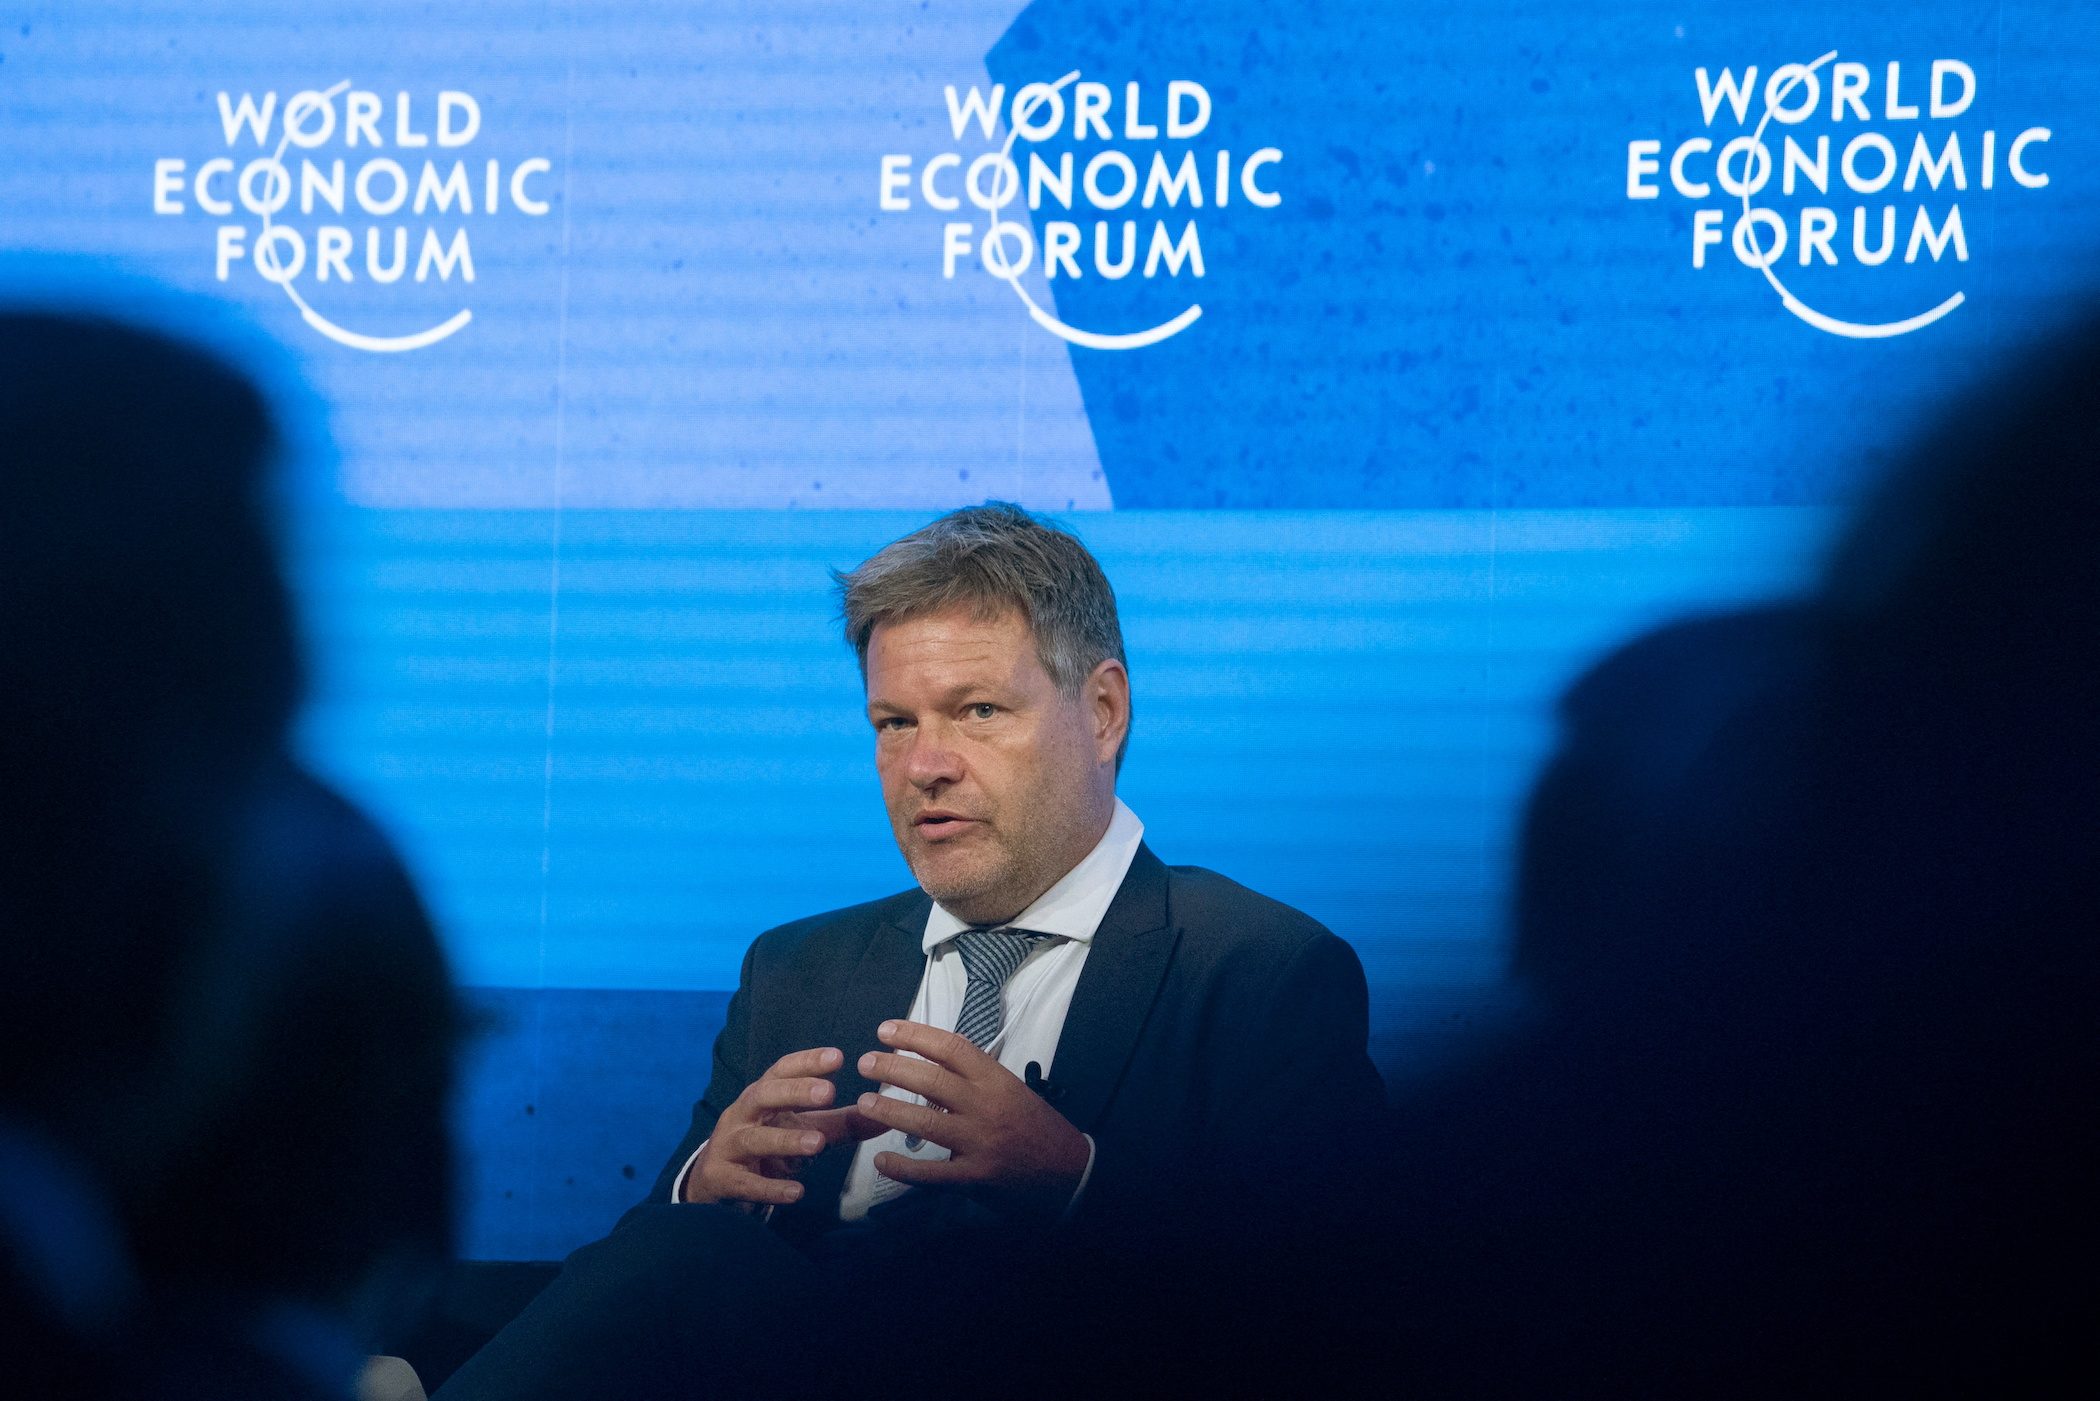 Economic outlook has ‘darkened,’ business and government leaders warn in Davos